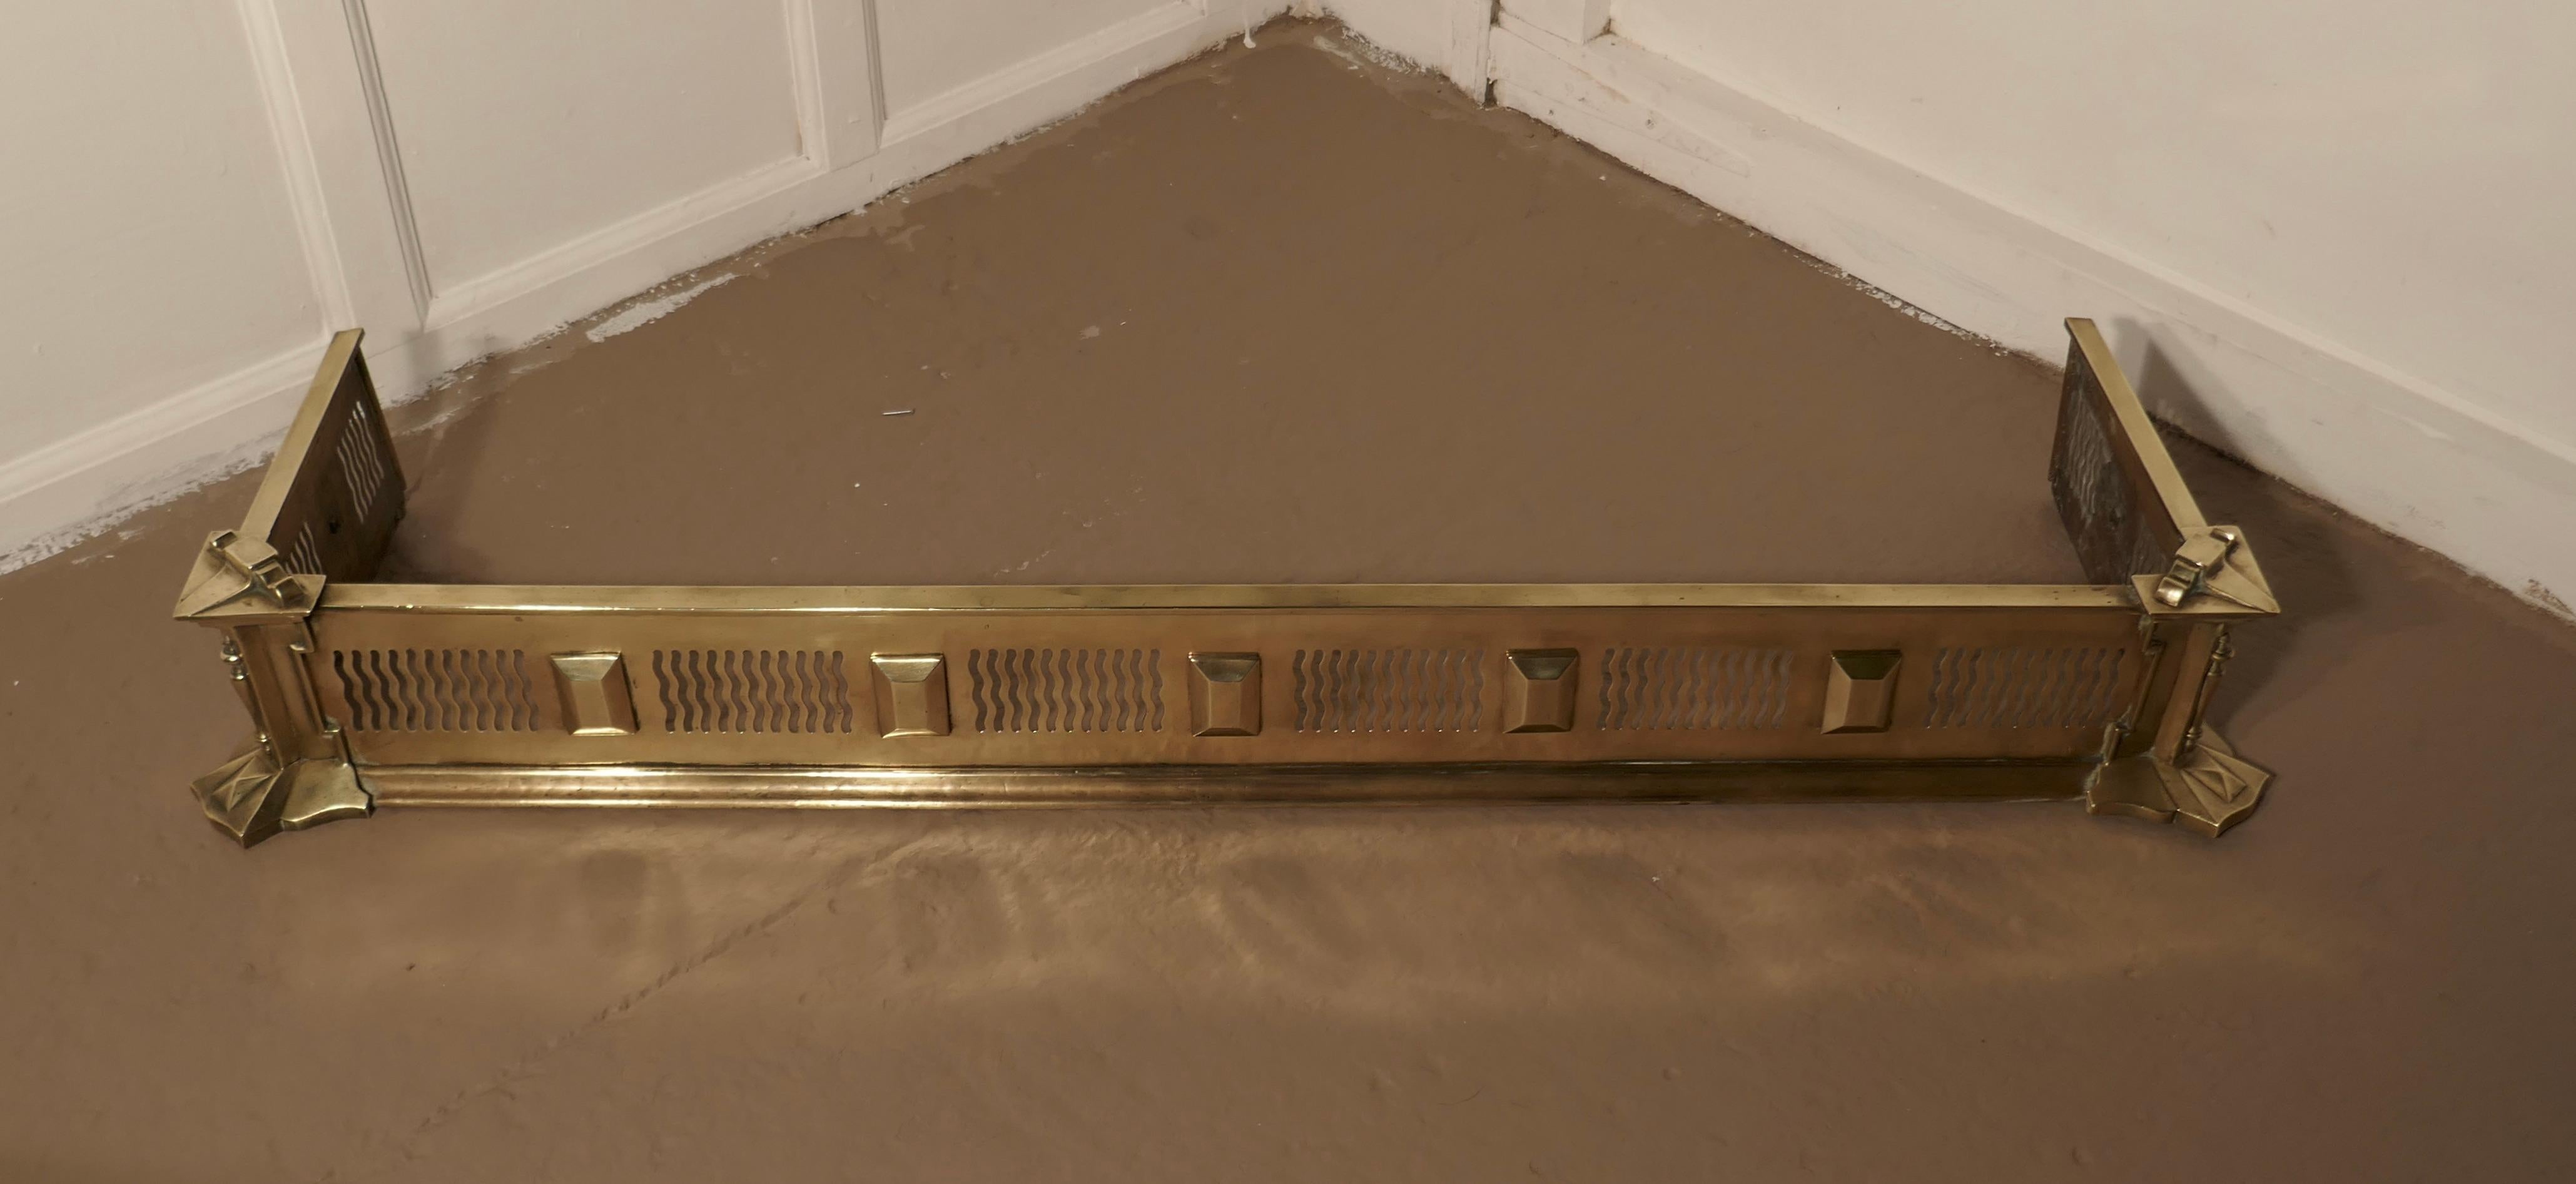 Large Victorian Art Nouveau brass fender

This is a beautifully designed Victorian brass fender it has superb geometric patterns set on the pierced brass surround
The fender is good quality and in very good condition it is 8” high, and 54” long